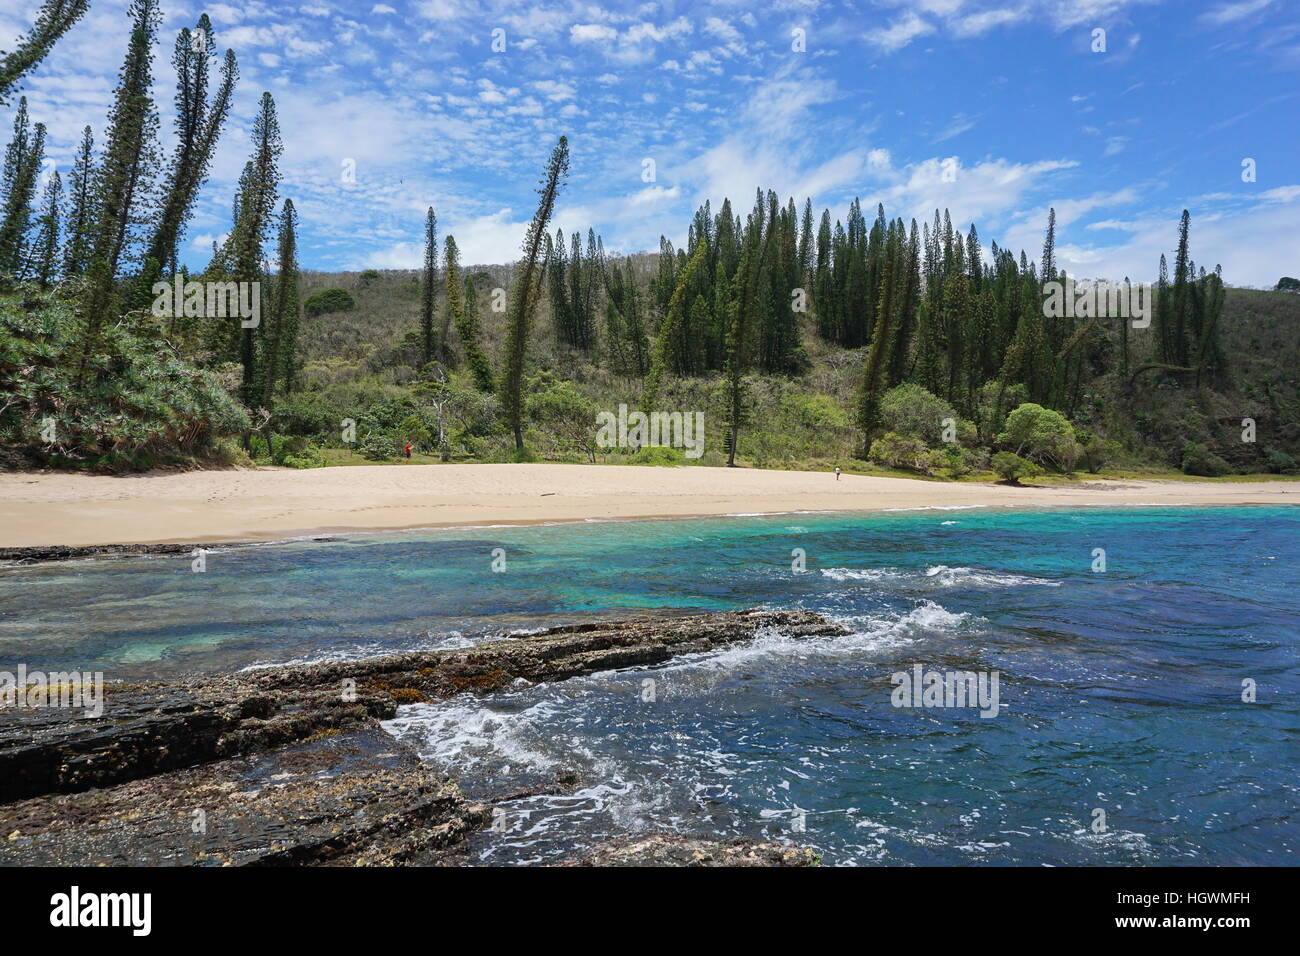 Coastal landscape, beach with endemic pines, New Caledonia, Turtle bay, Bourail, Grande Terre, south Pacific Stock Photo